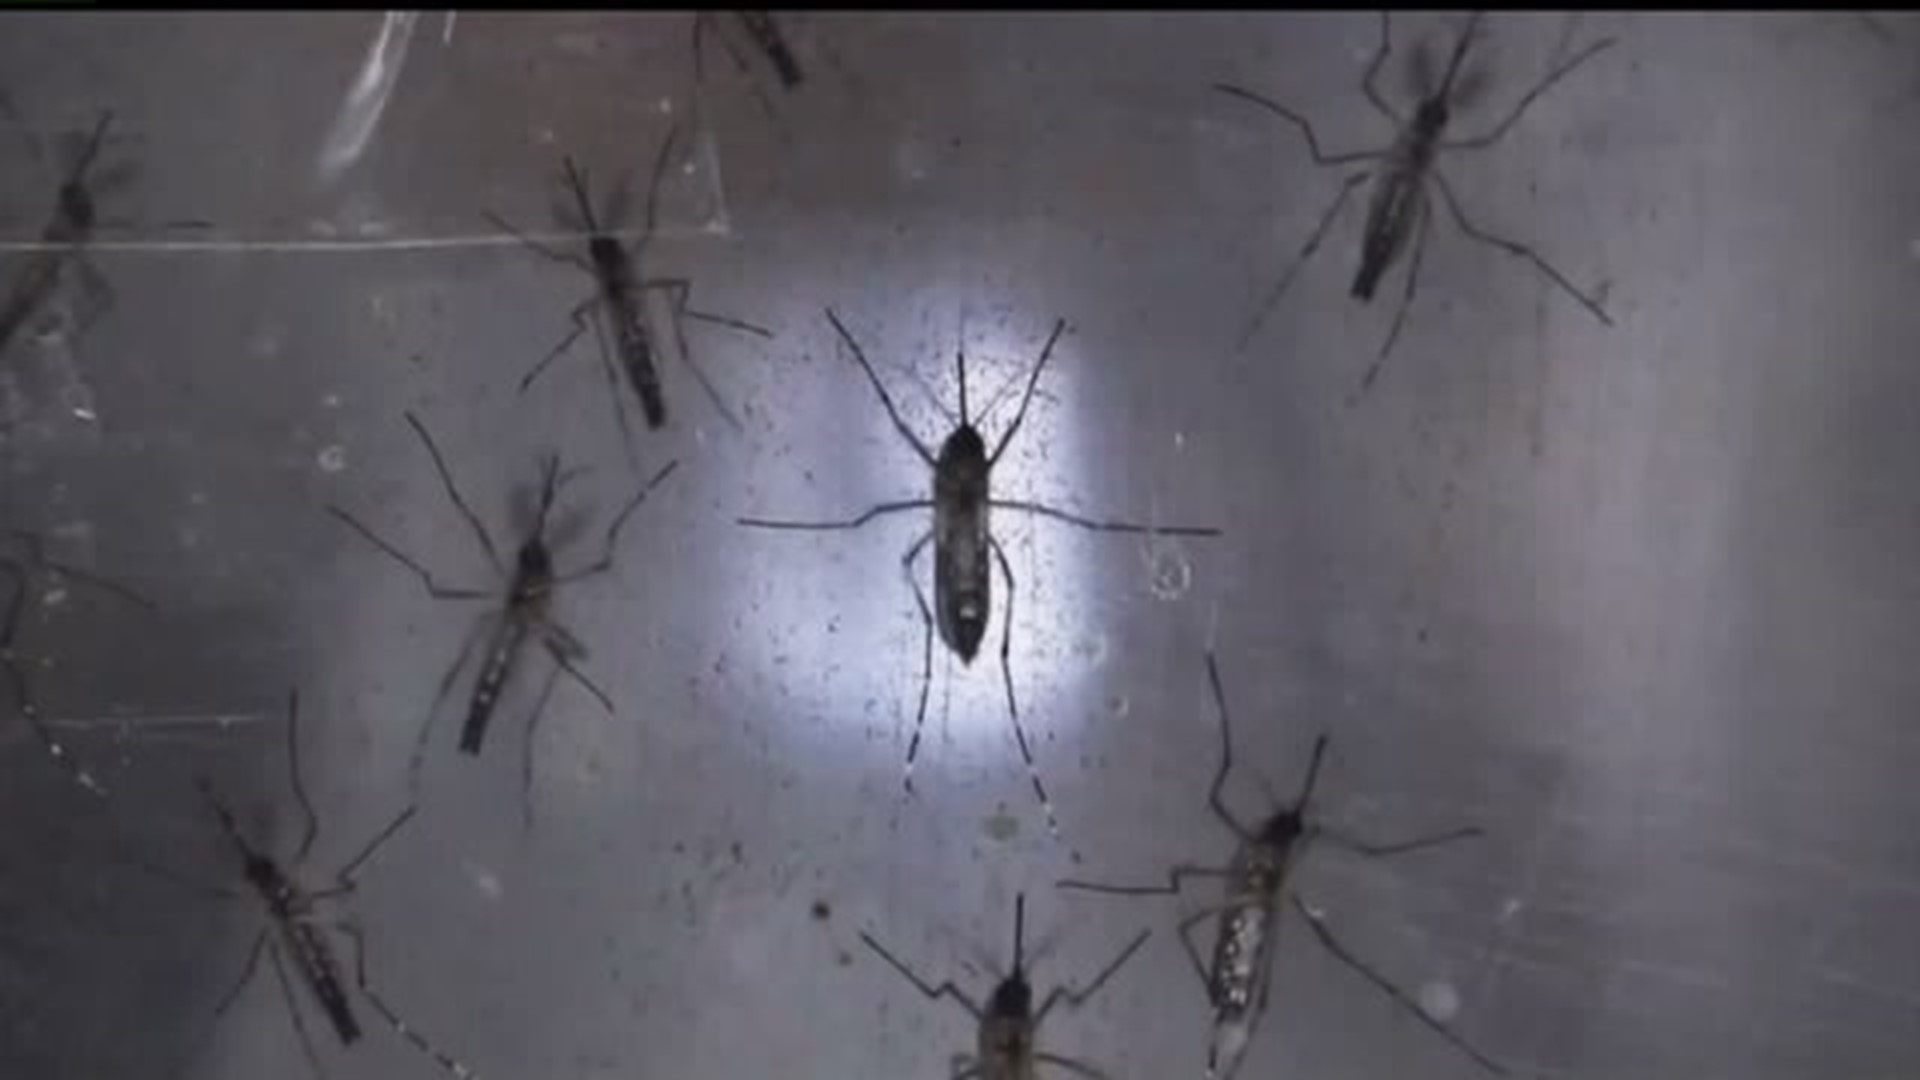 Should Pennsylvanians be worried about Zika?